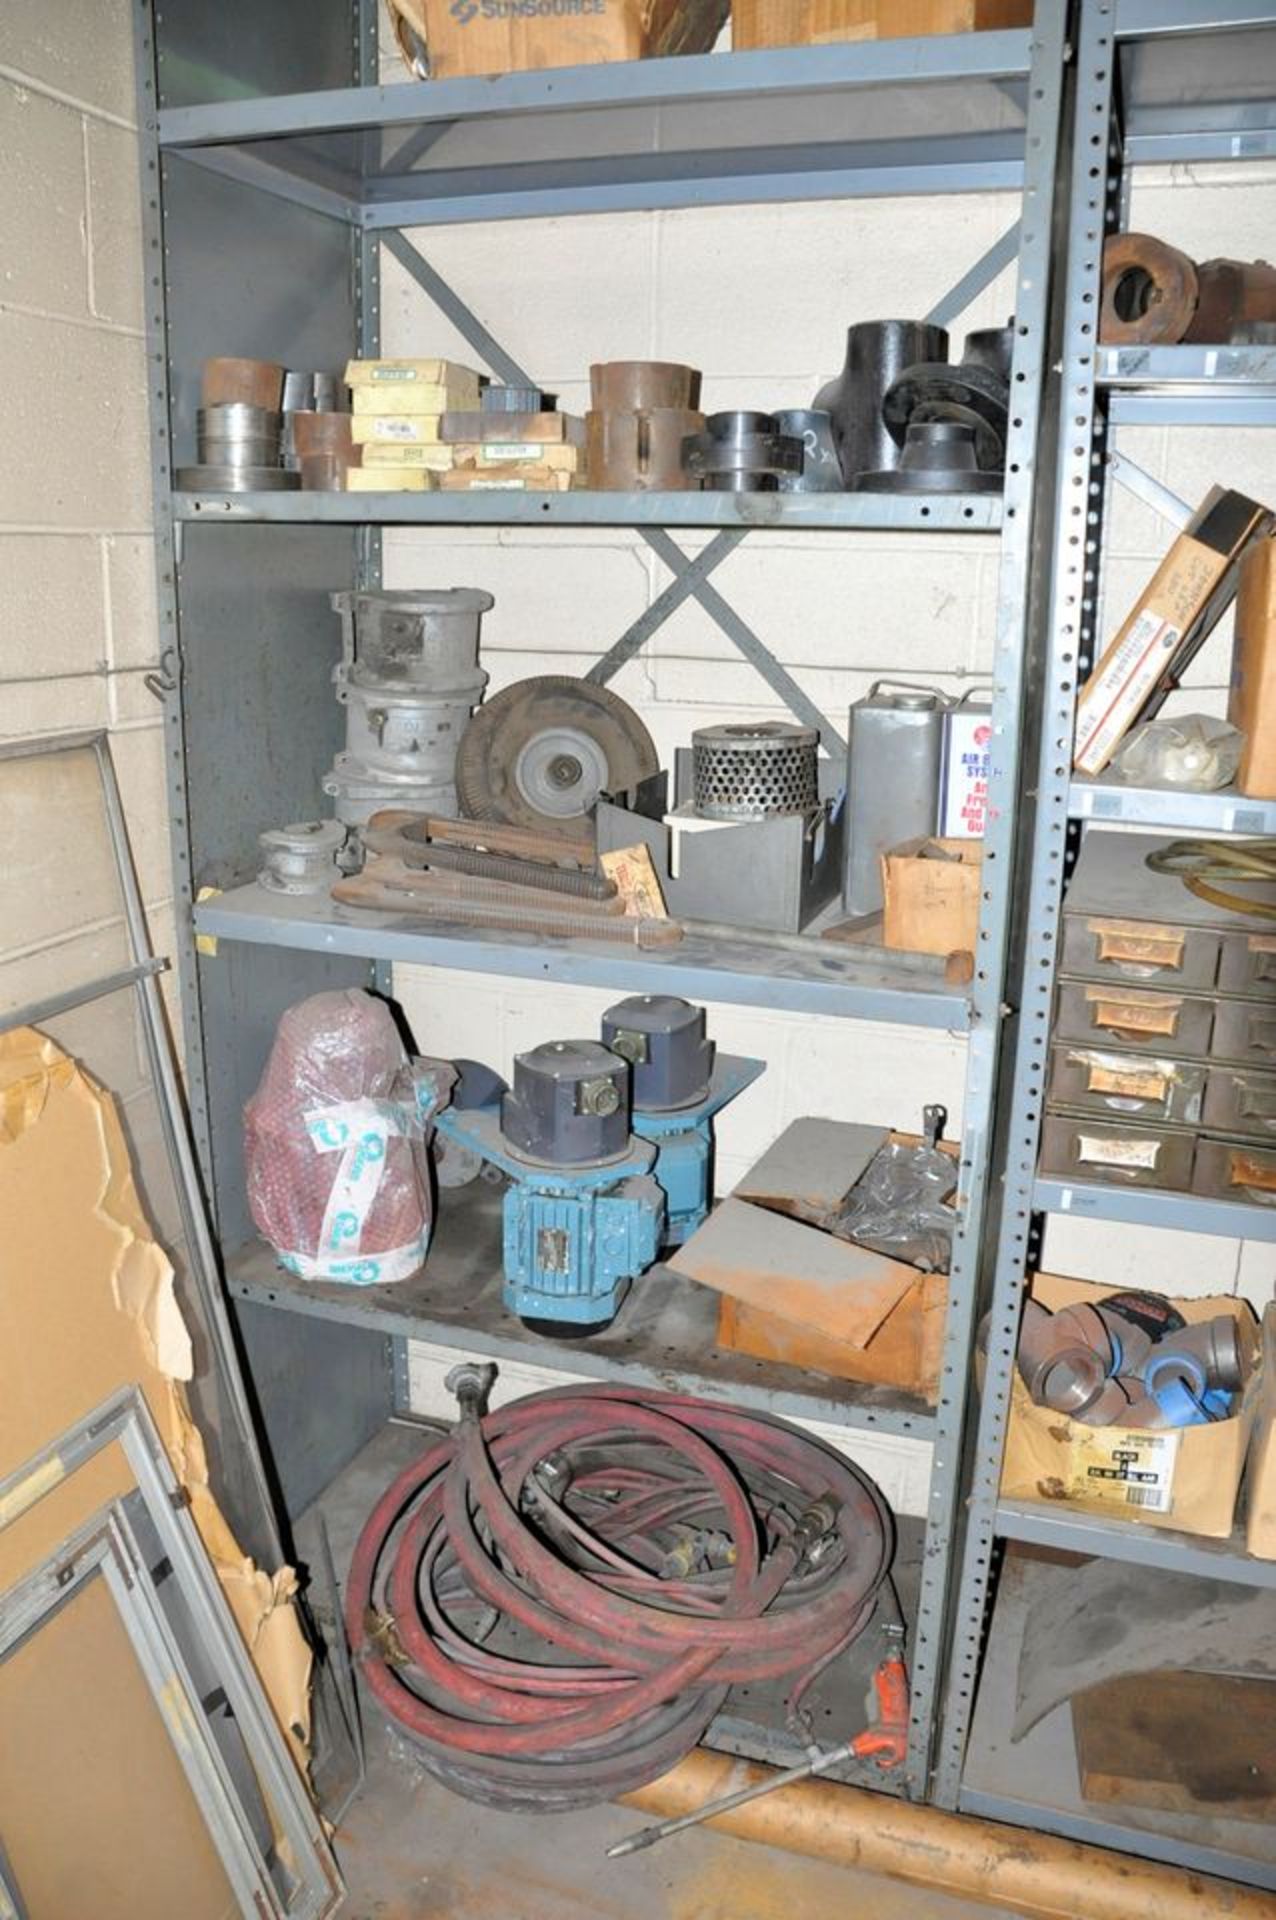 Lot - Various Machine Parts, Lockers, File Cabinets, Blueprint Cabinet in (1) Office, (No Files, - Image 7 of 10